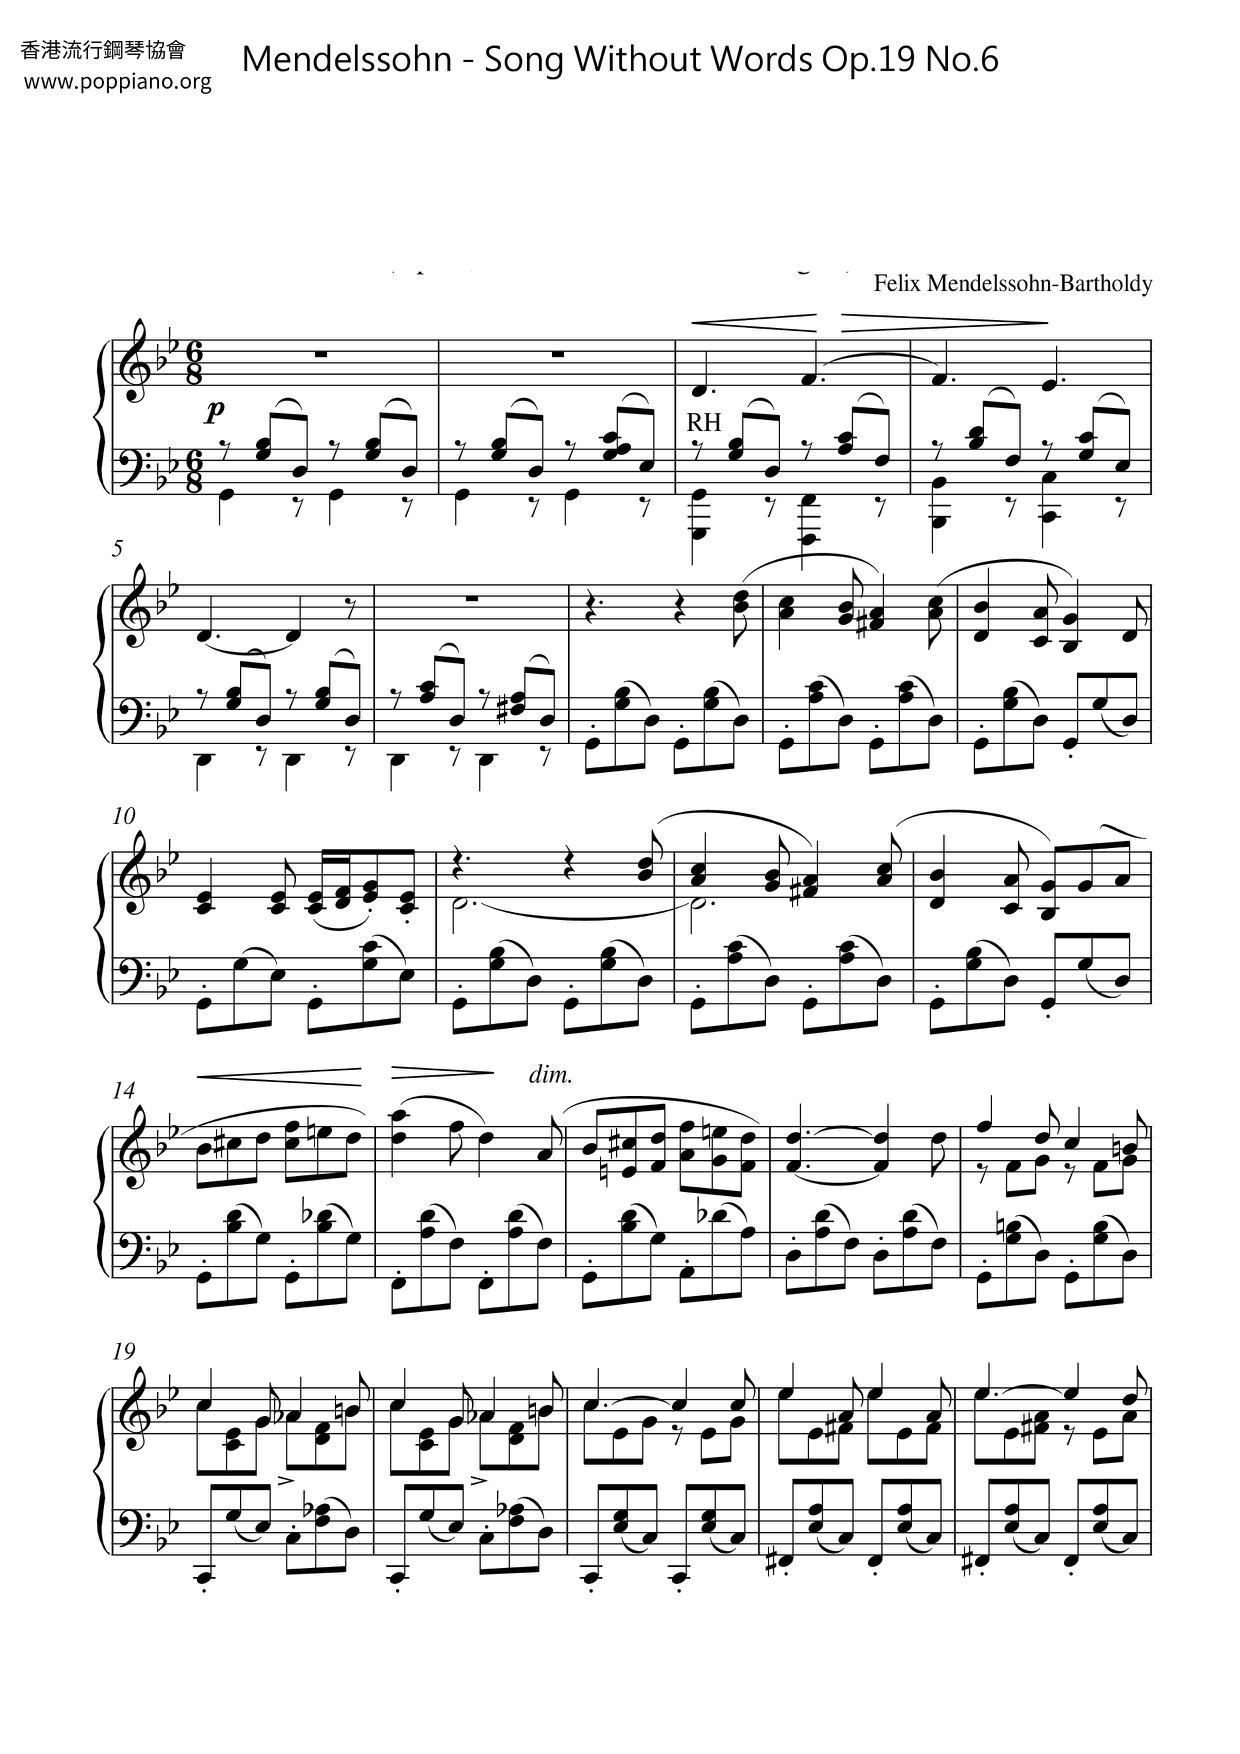 Song Without Words Op.19 No.6, Venetian Boat Songピアノ譜